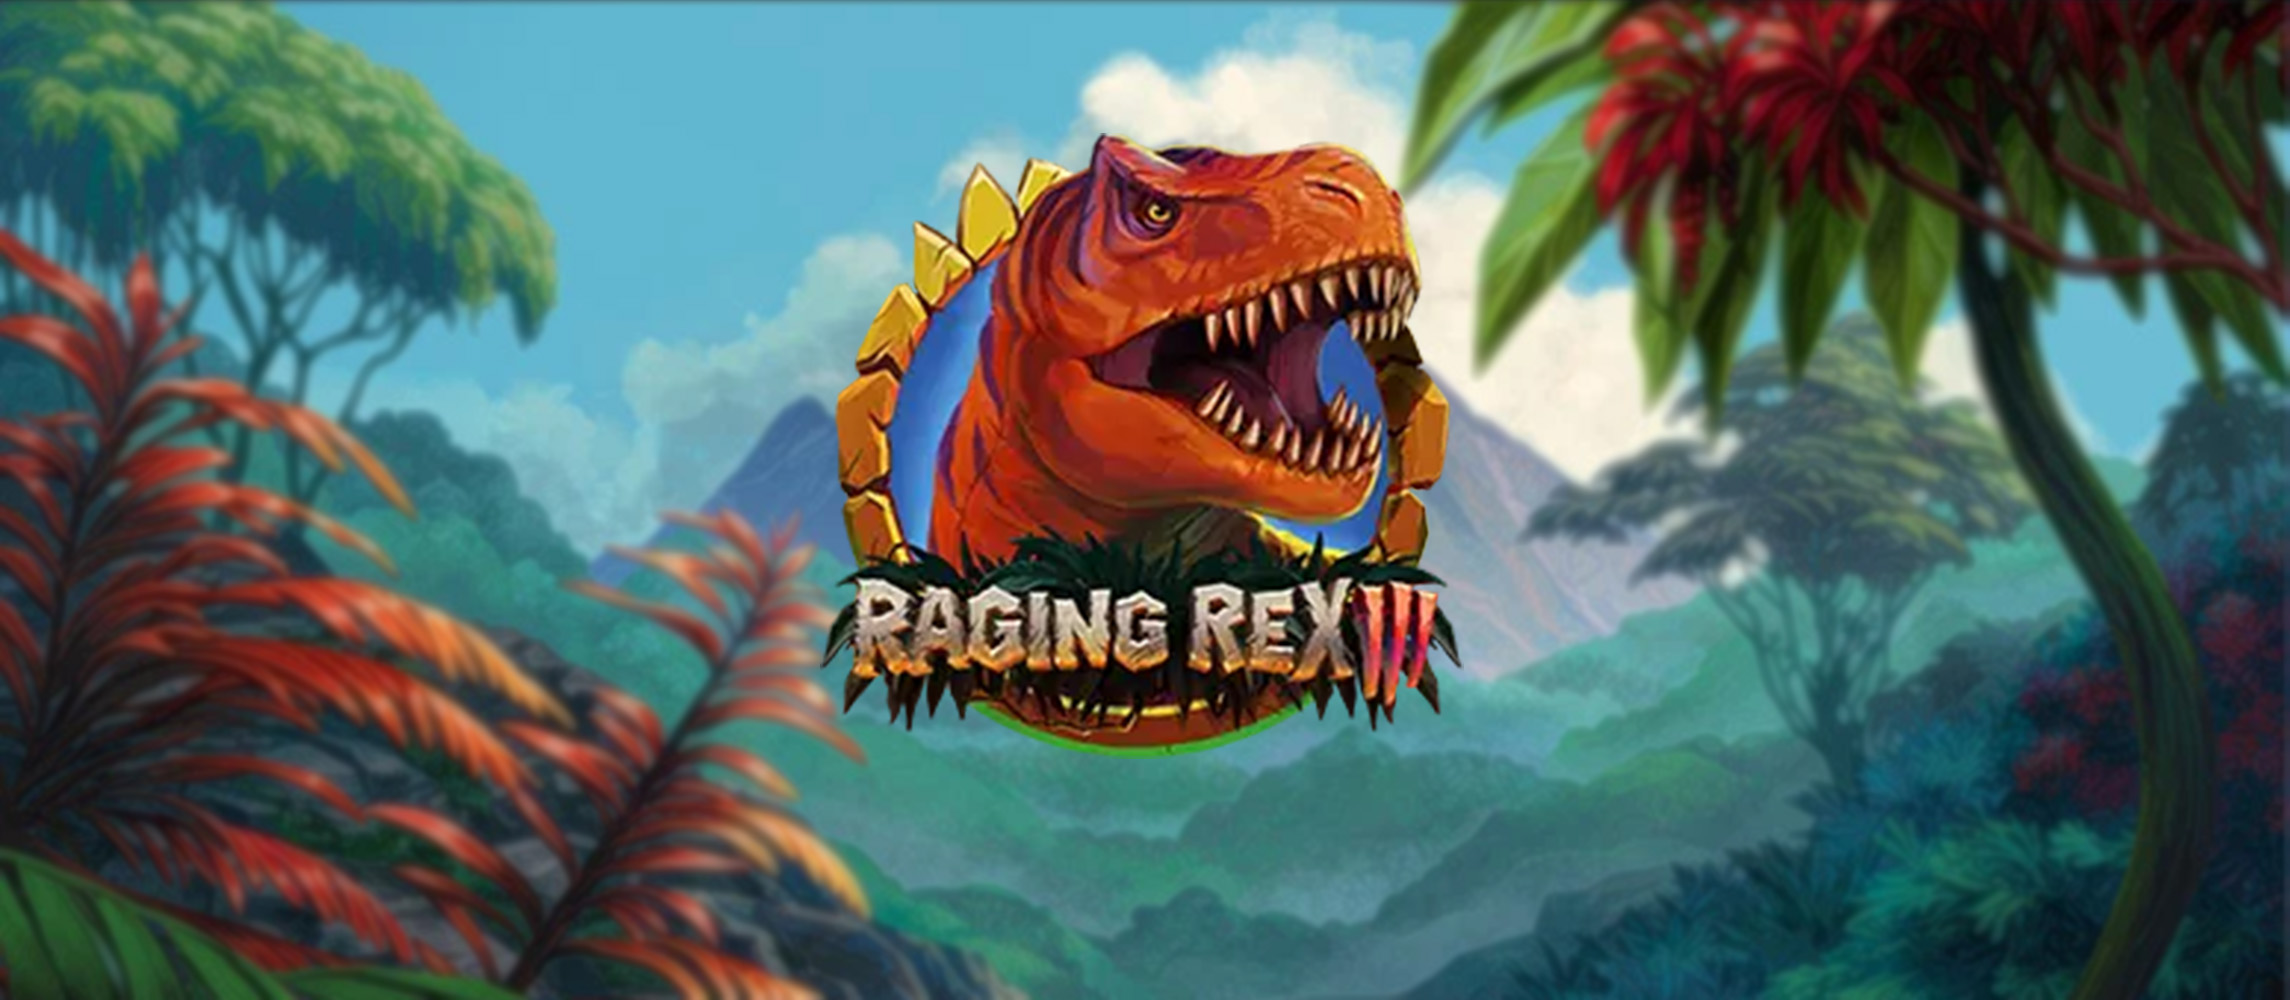 Raging Rex 3 - new by Play'n GO